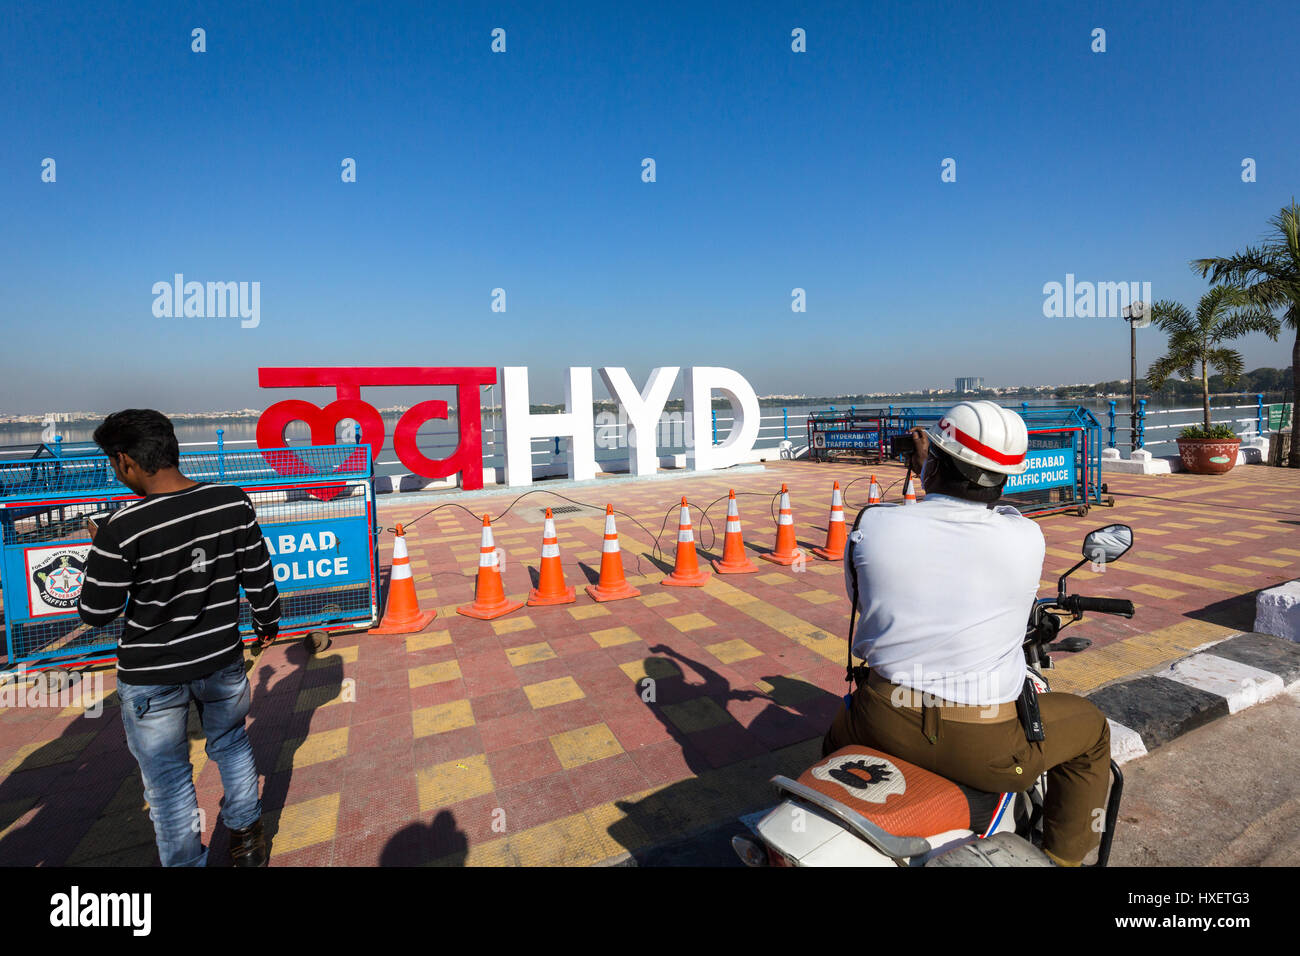 HYDERABAD, INDIA - NOVEMBER 26,2016. Love Hyd is a new typographic installation designed by Hitesh Malaviya & Hanif Kureshi.It is a monument of love d Stock Photo